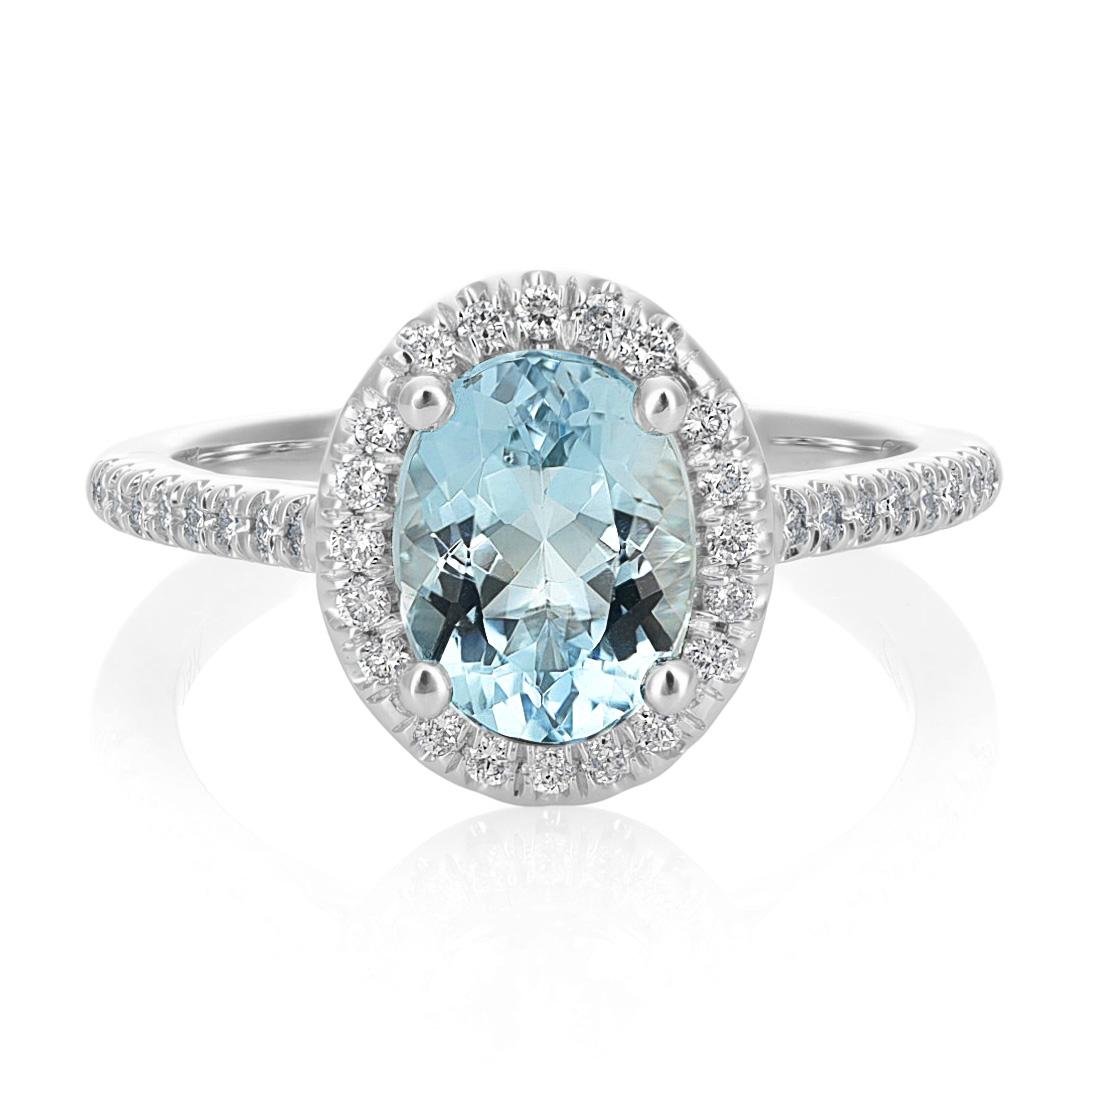 0.66 Carats Natural Aquamarine Diamonds set in 14K White Gold In New Condition For Sale In Los Angeles, CA